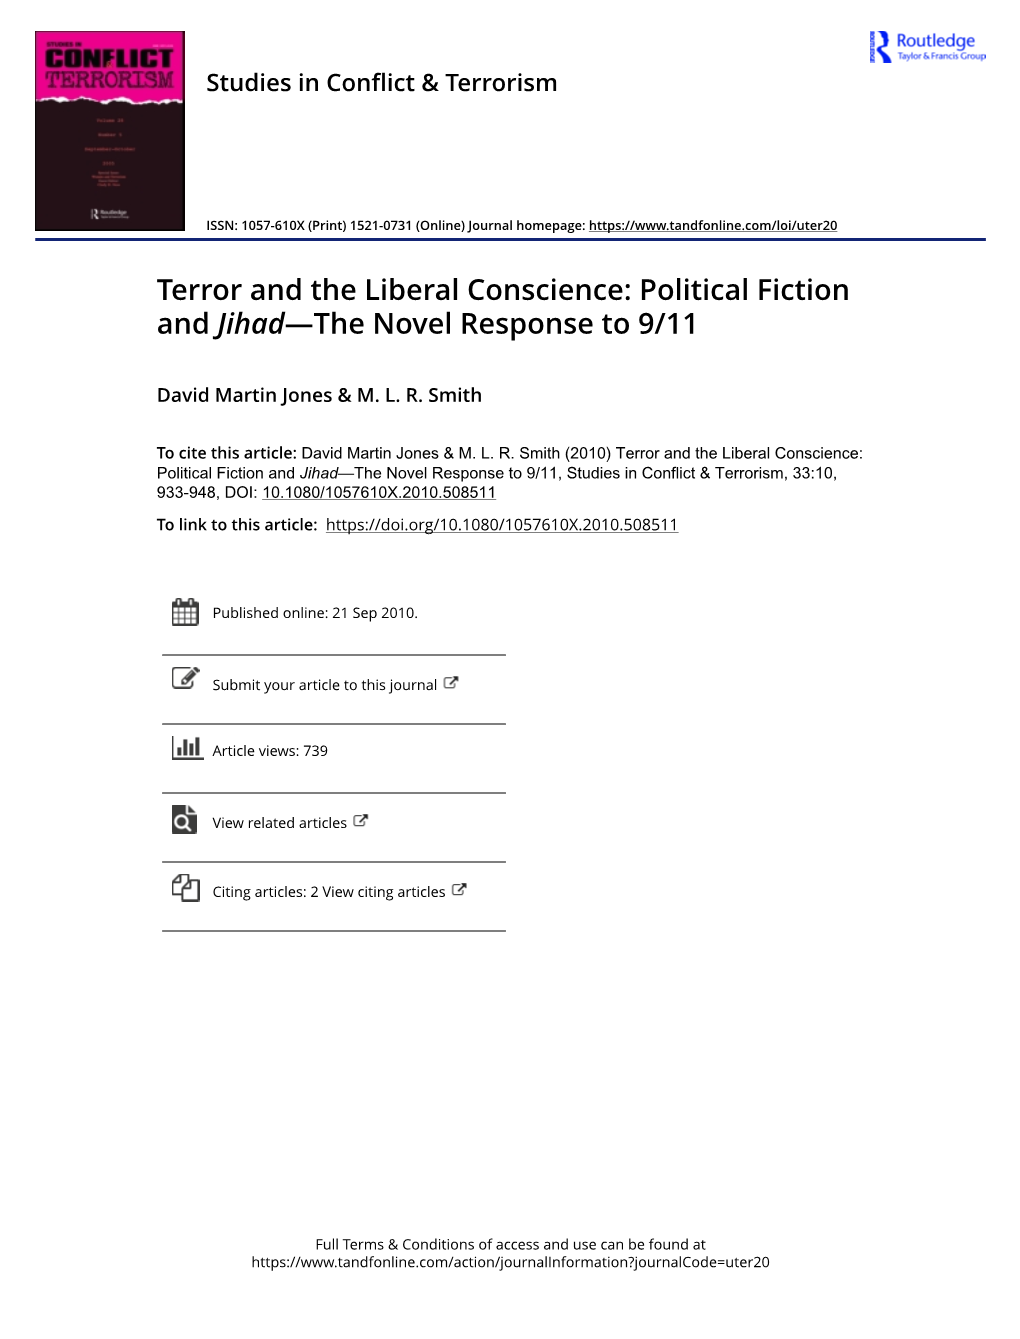 Terror and the Liberal Conscience: Political Fiction and Jihad—The Novel Response to 9/11